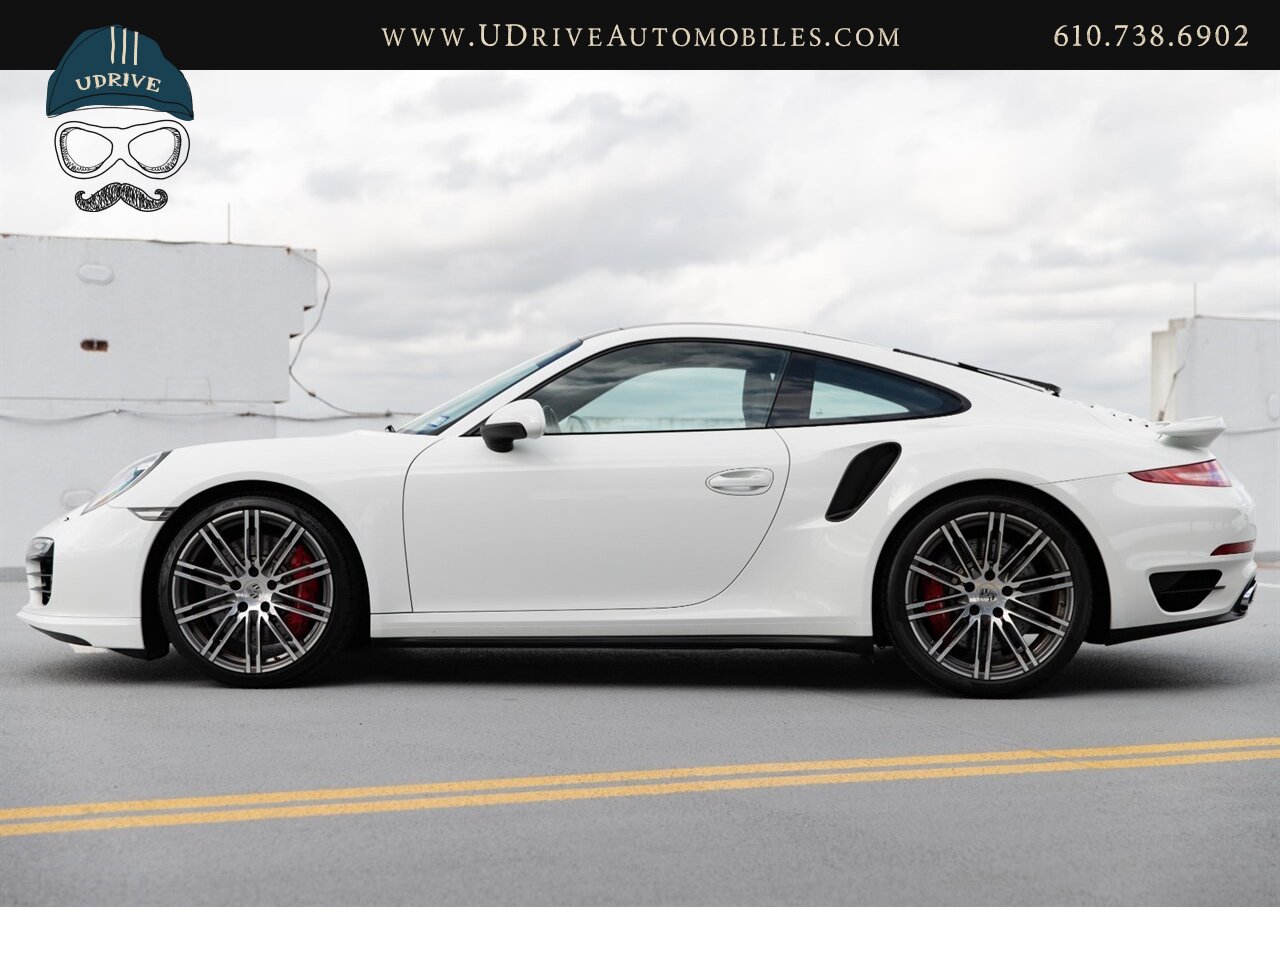 2014 Porsche 911 Turbo 12k Miles White over Black Chrono Rear Wiper  Sport Seats 20in Turbo Whls Sunroof Red Belts - Photo 6 - West Chester, PA 19382